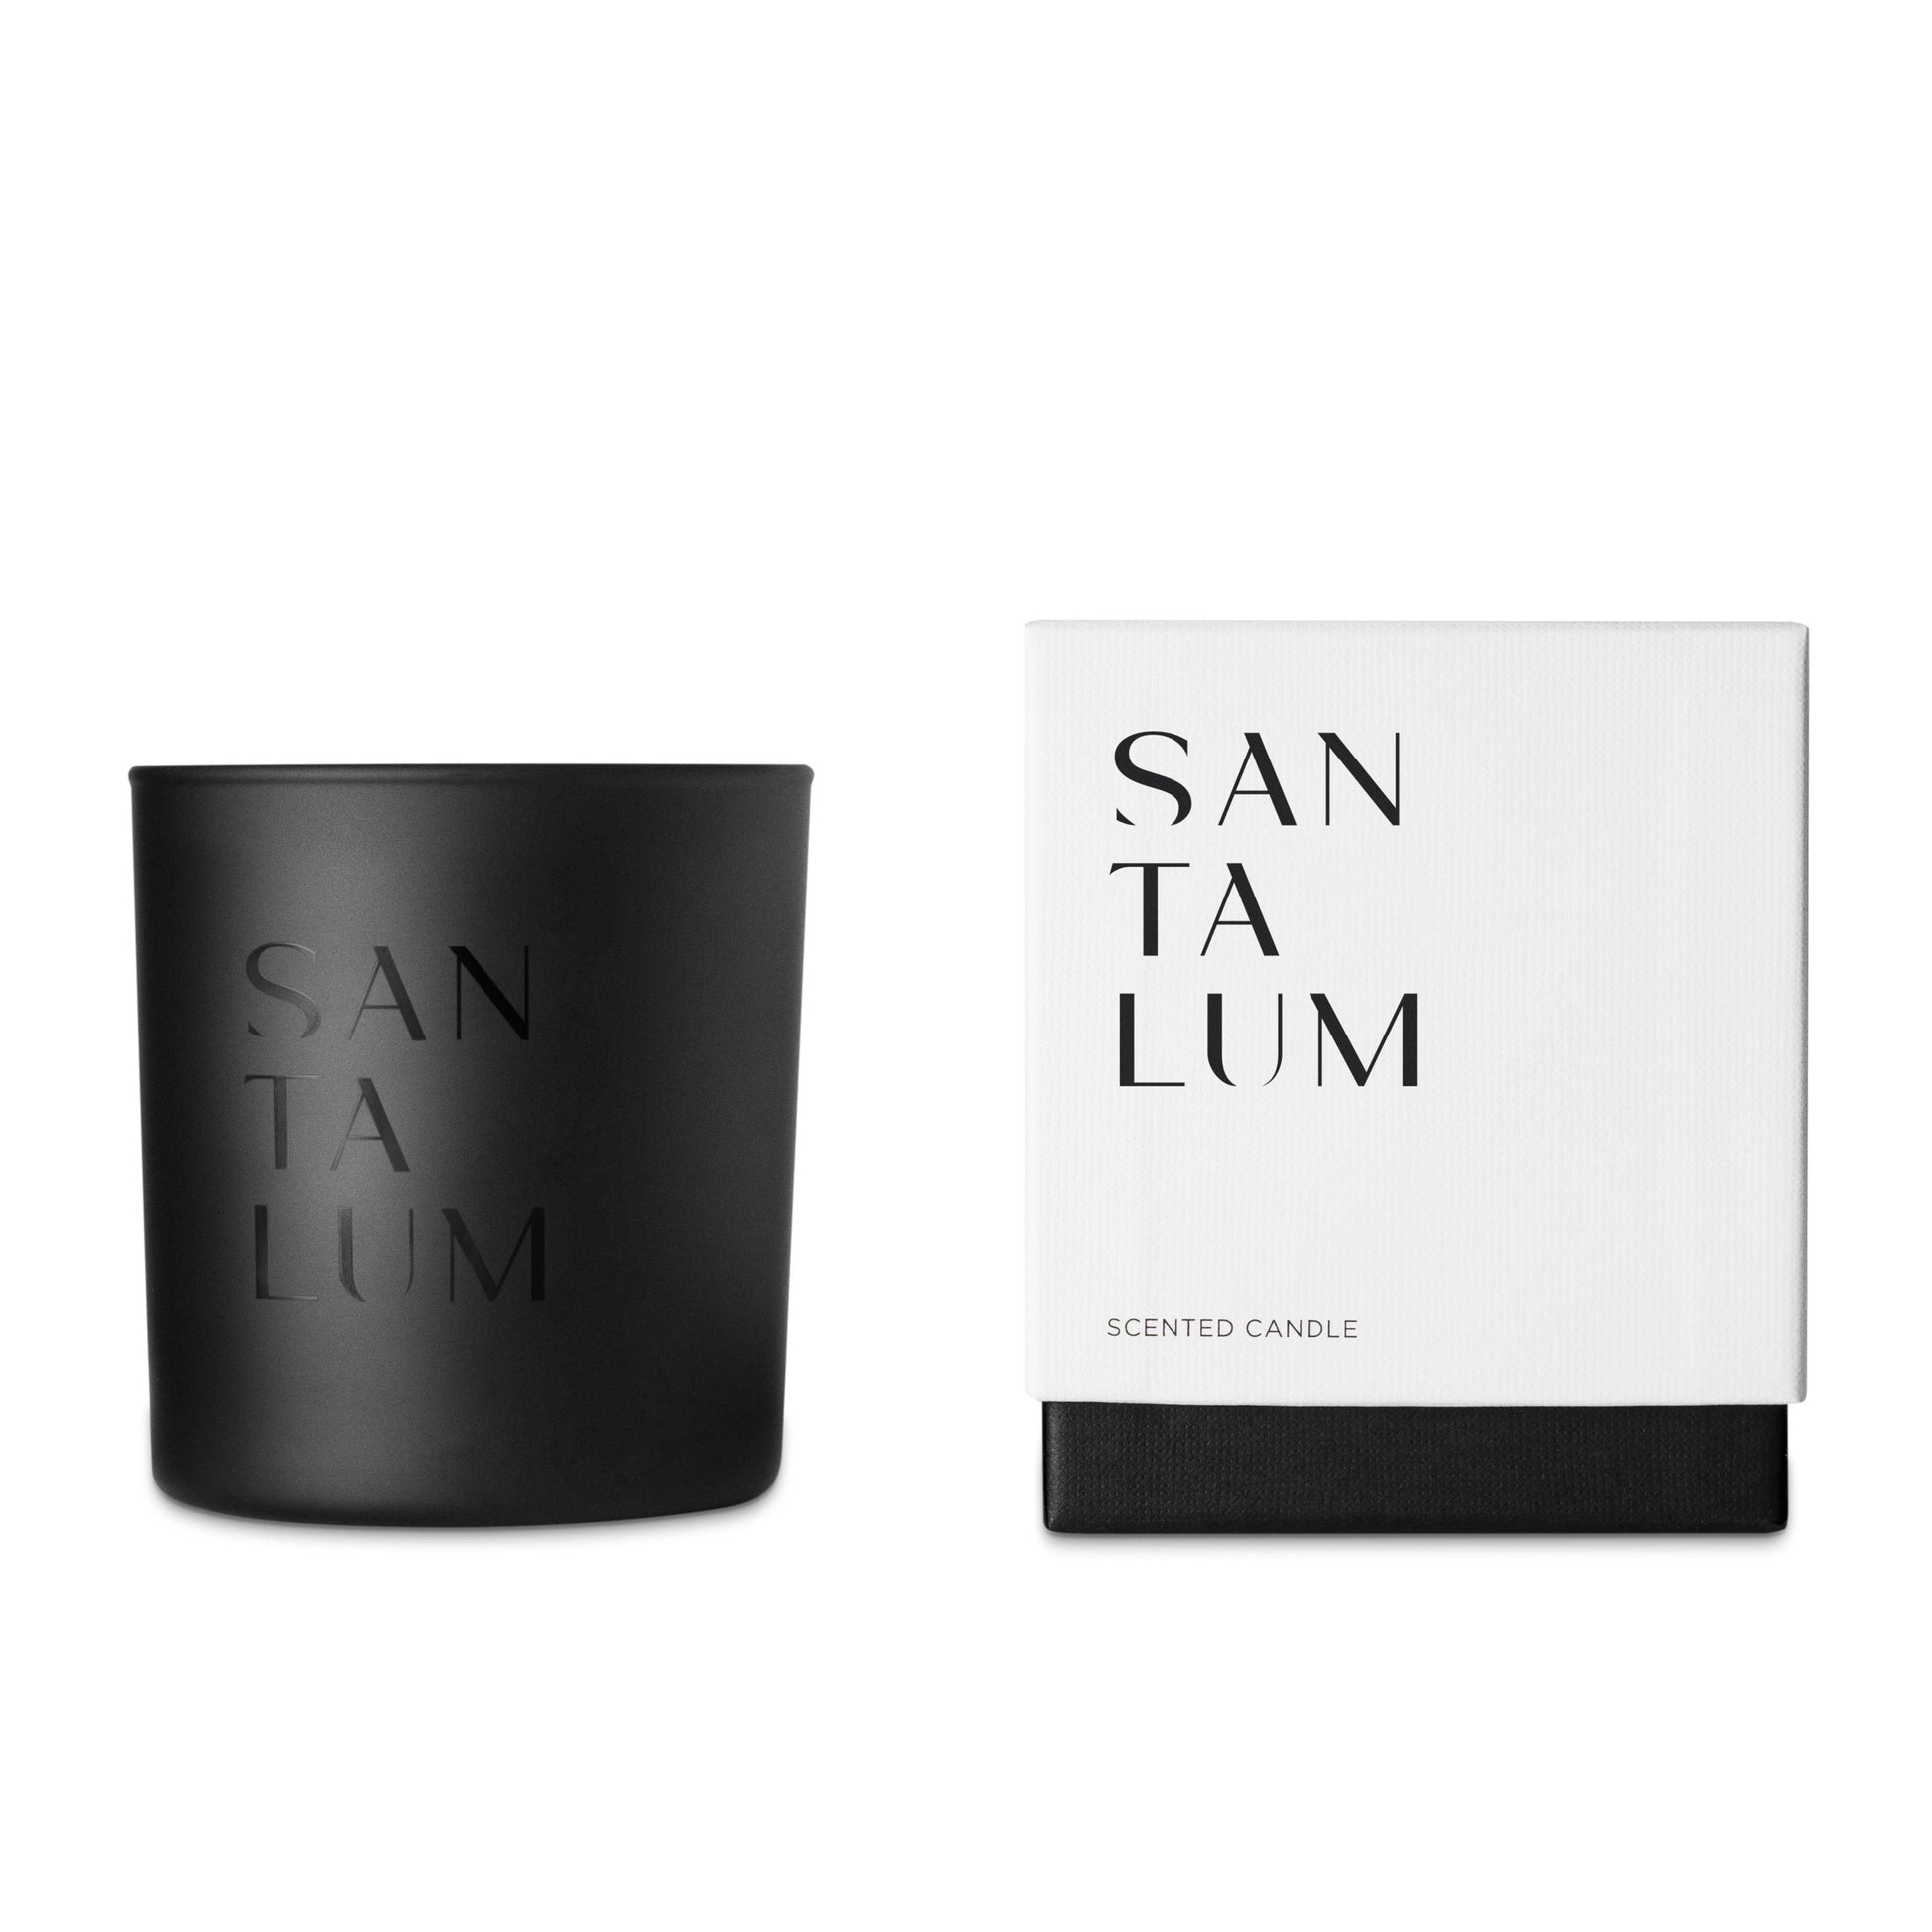 Santalum Eclipse Candle Collection - The Crowd Went Wild